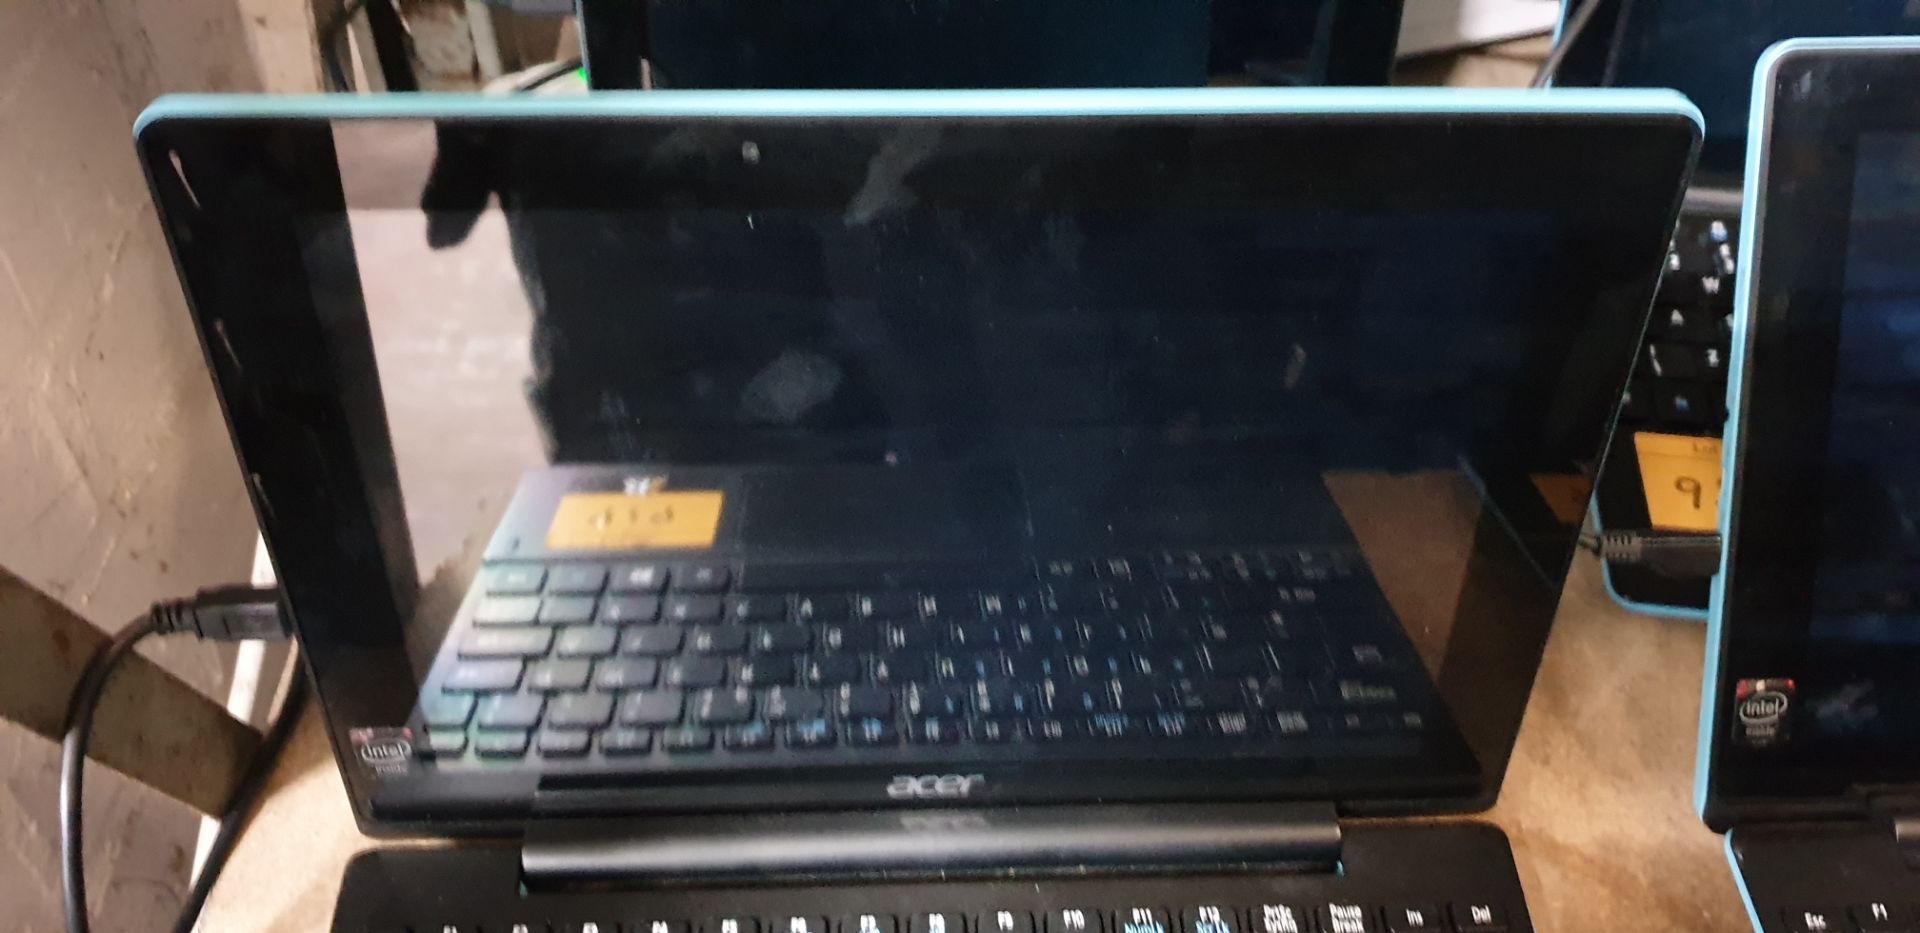 Acer notebook comprising touchscreen tablet and detachable keyboard Aspire Switch 10 E, Atom Z3735F - Image 7 of 13